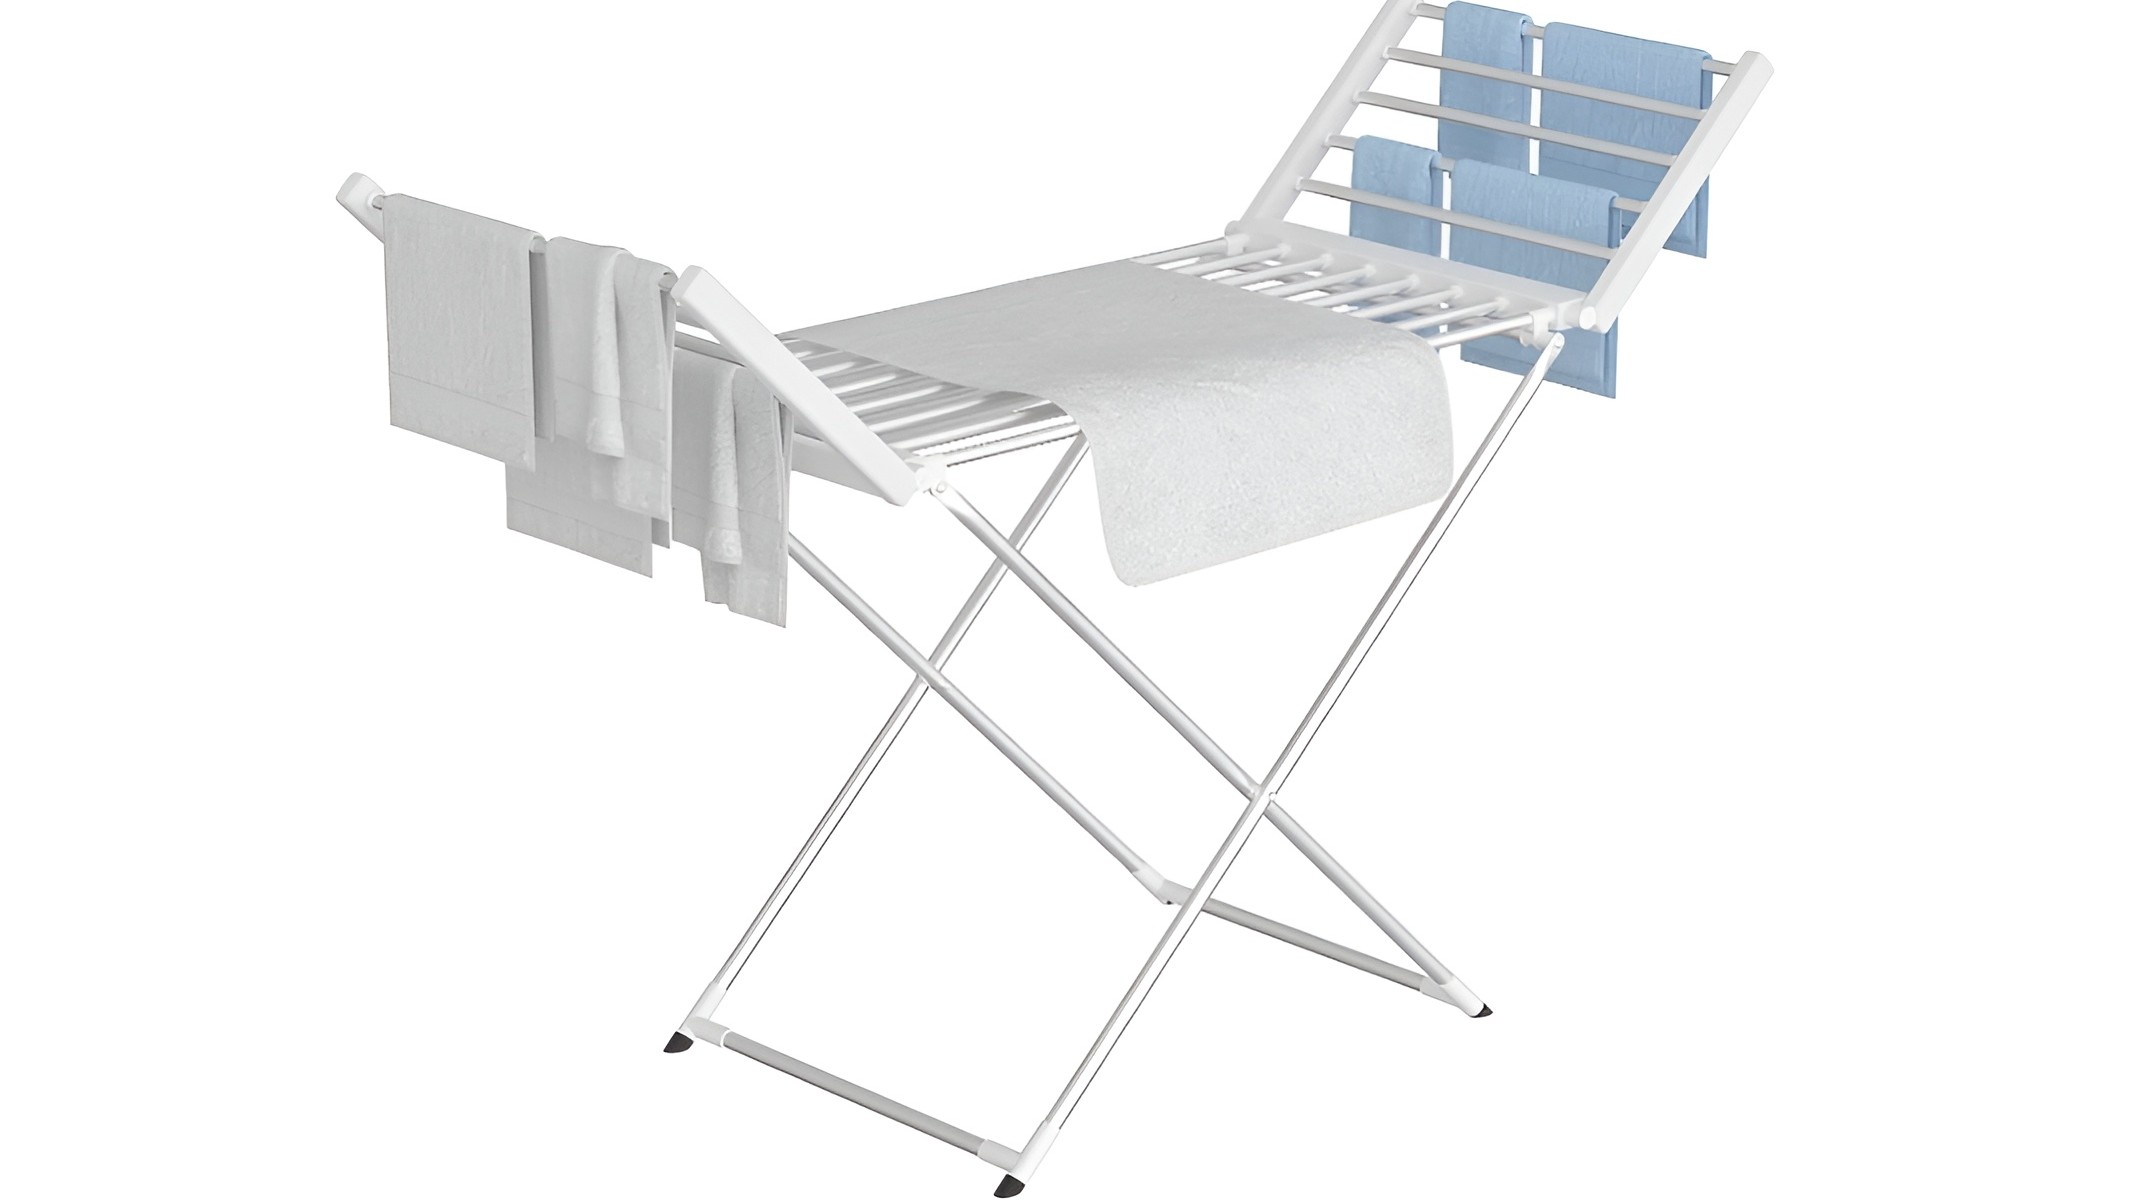 Heated Clothes Airer Build Quality and Safety